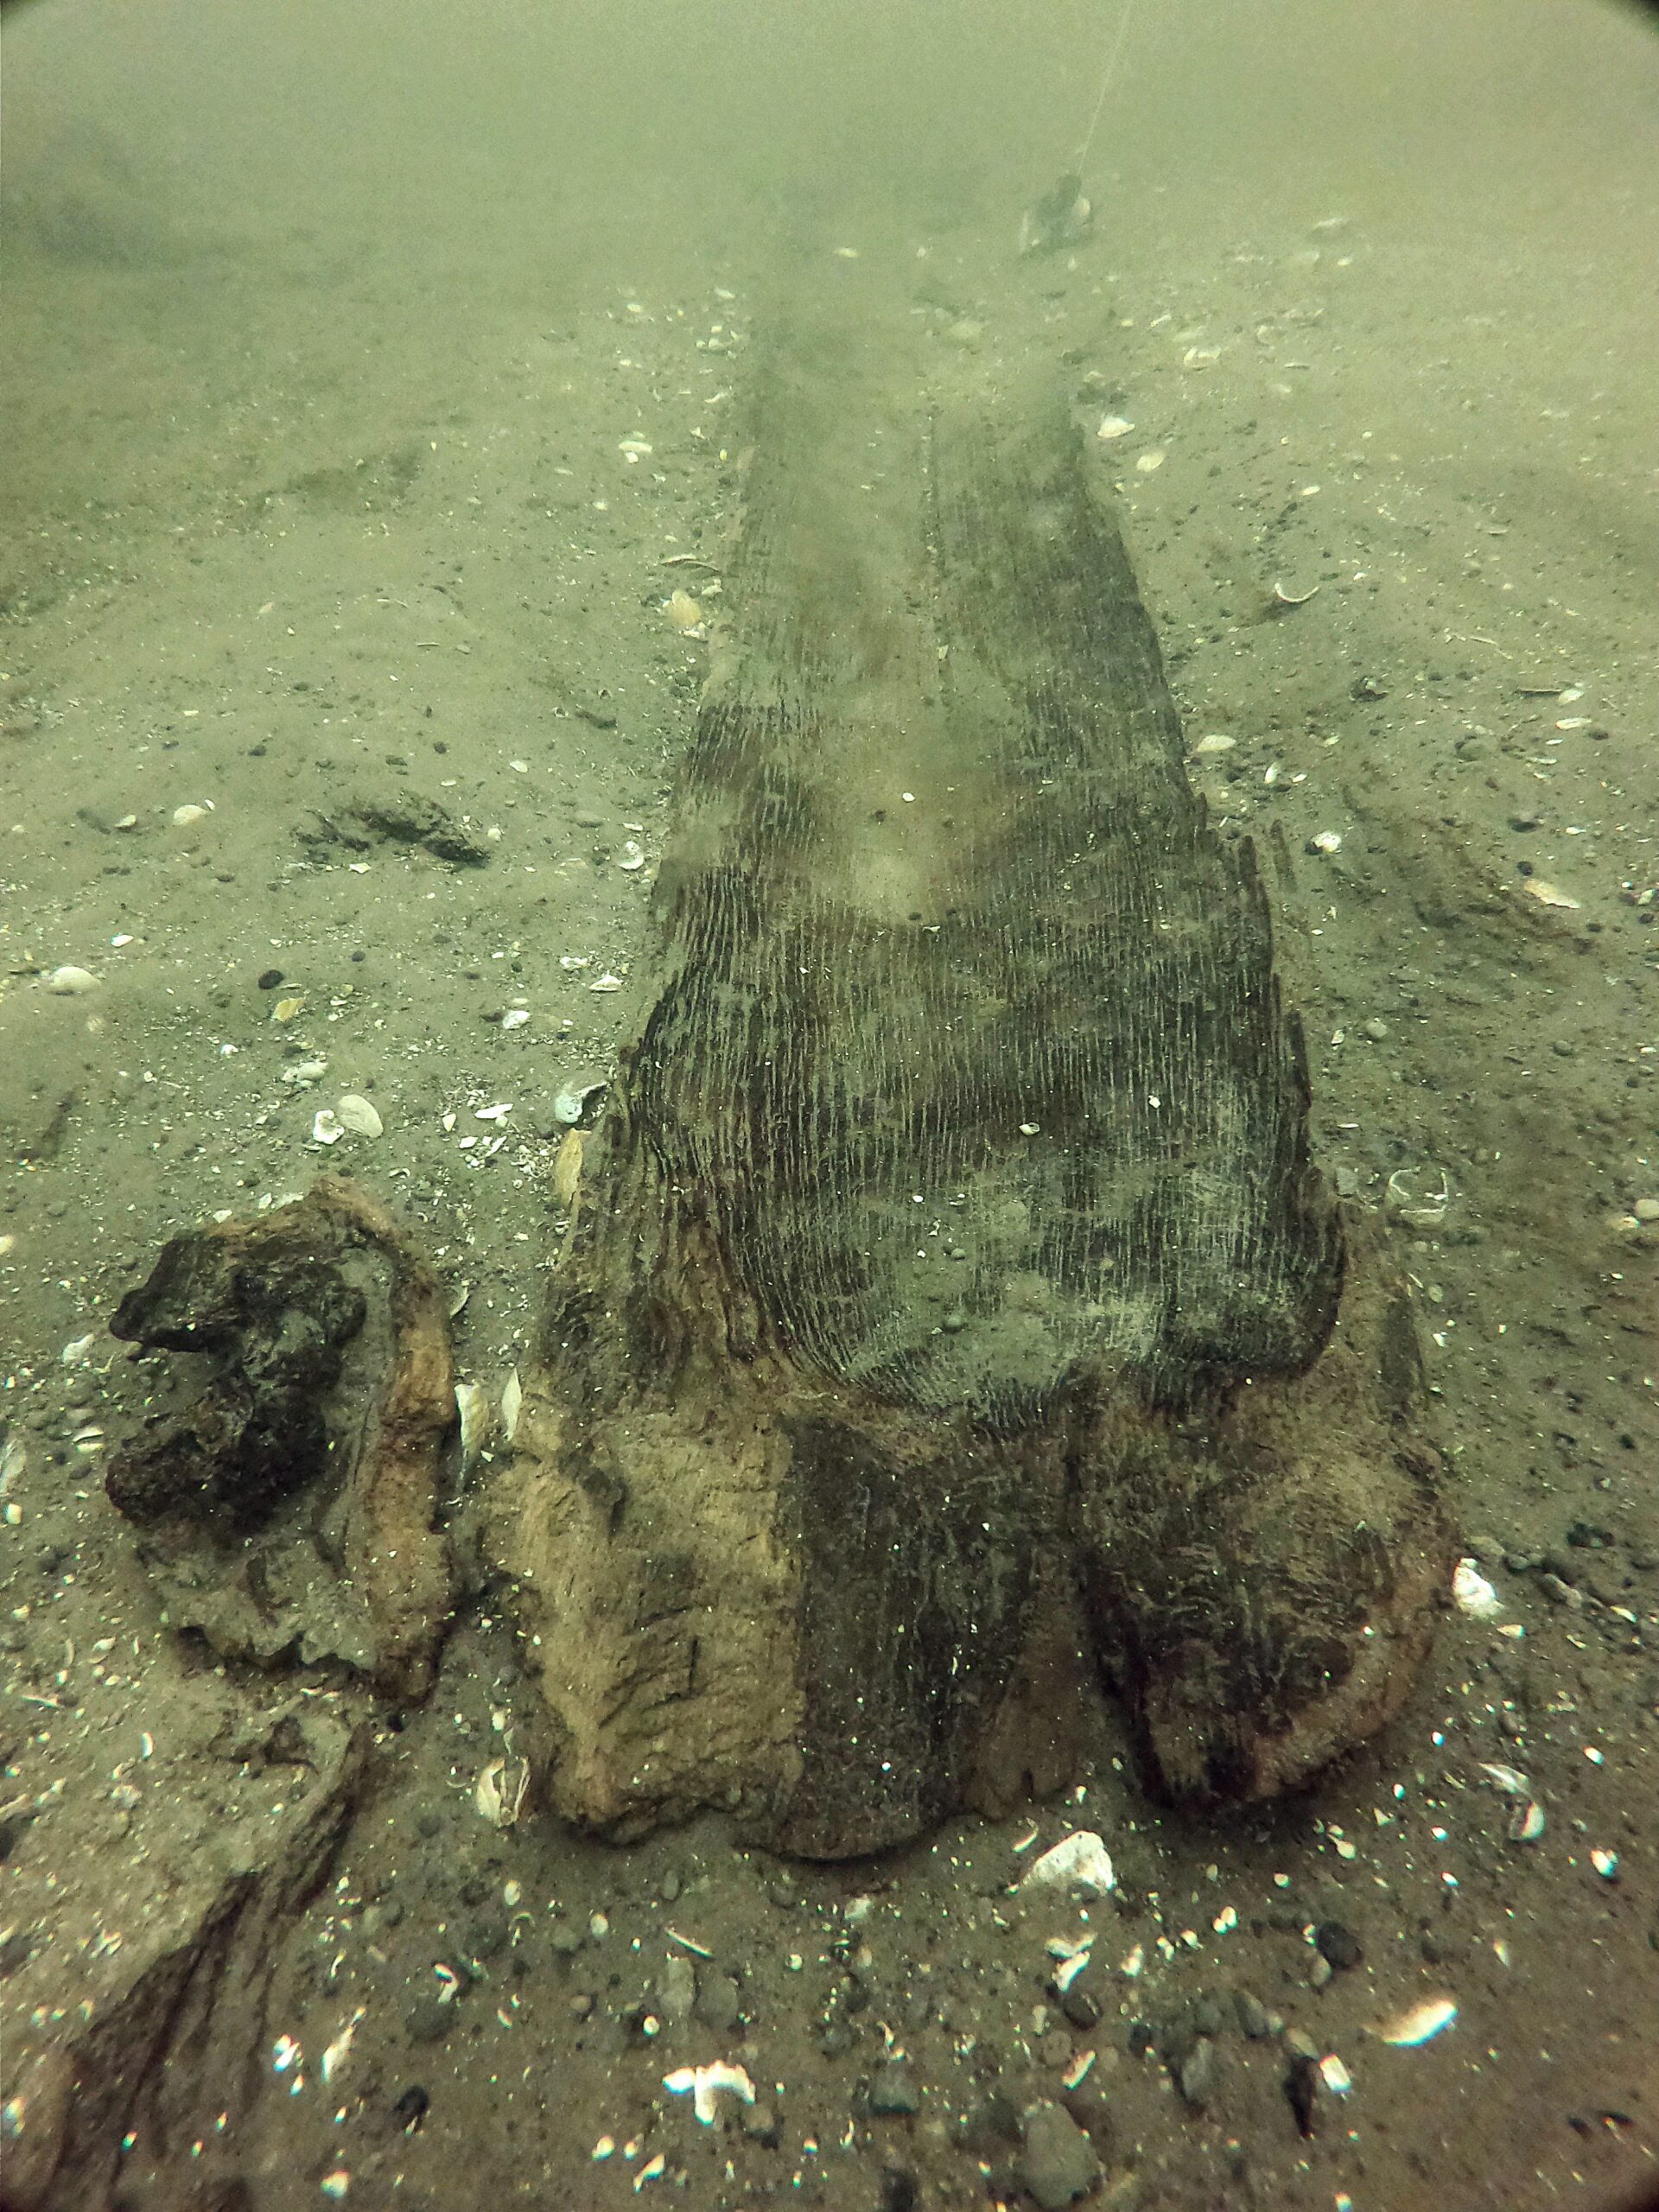 Up to 11 ancient canoes found in Madison’s Lake Mendota, archaeologists say